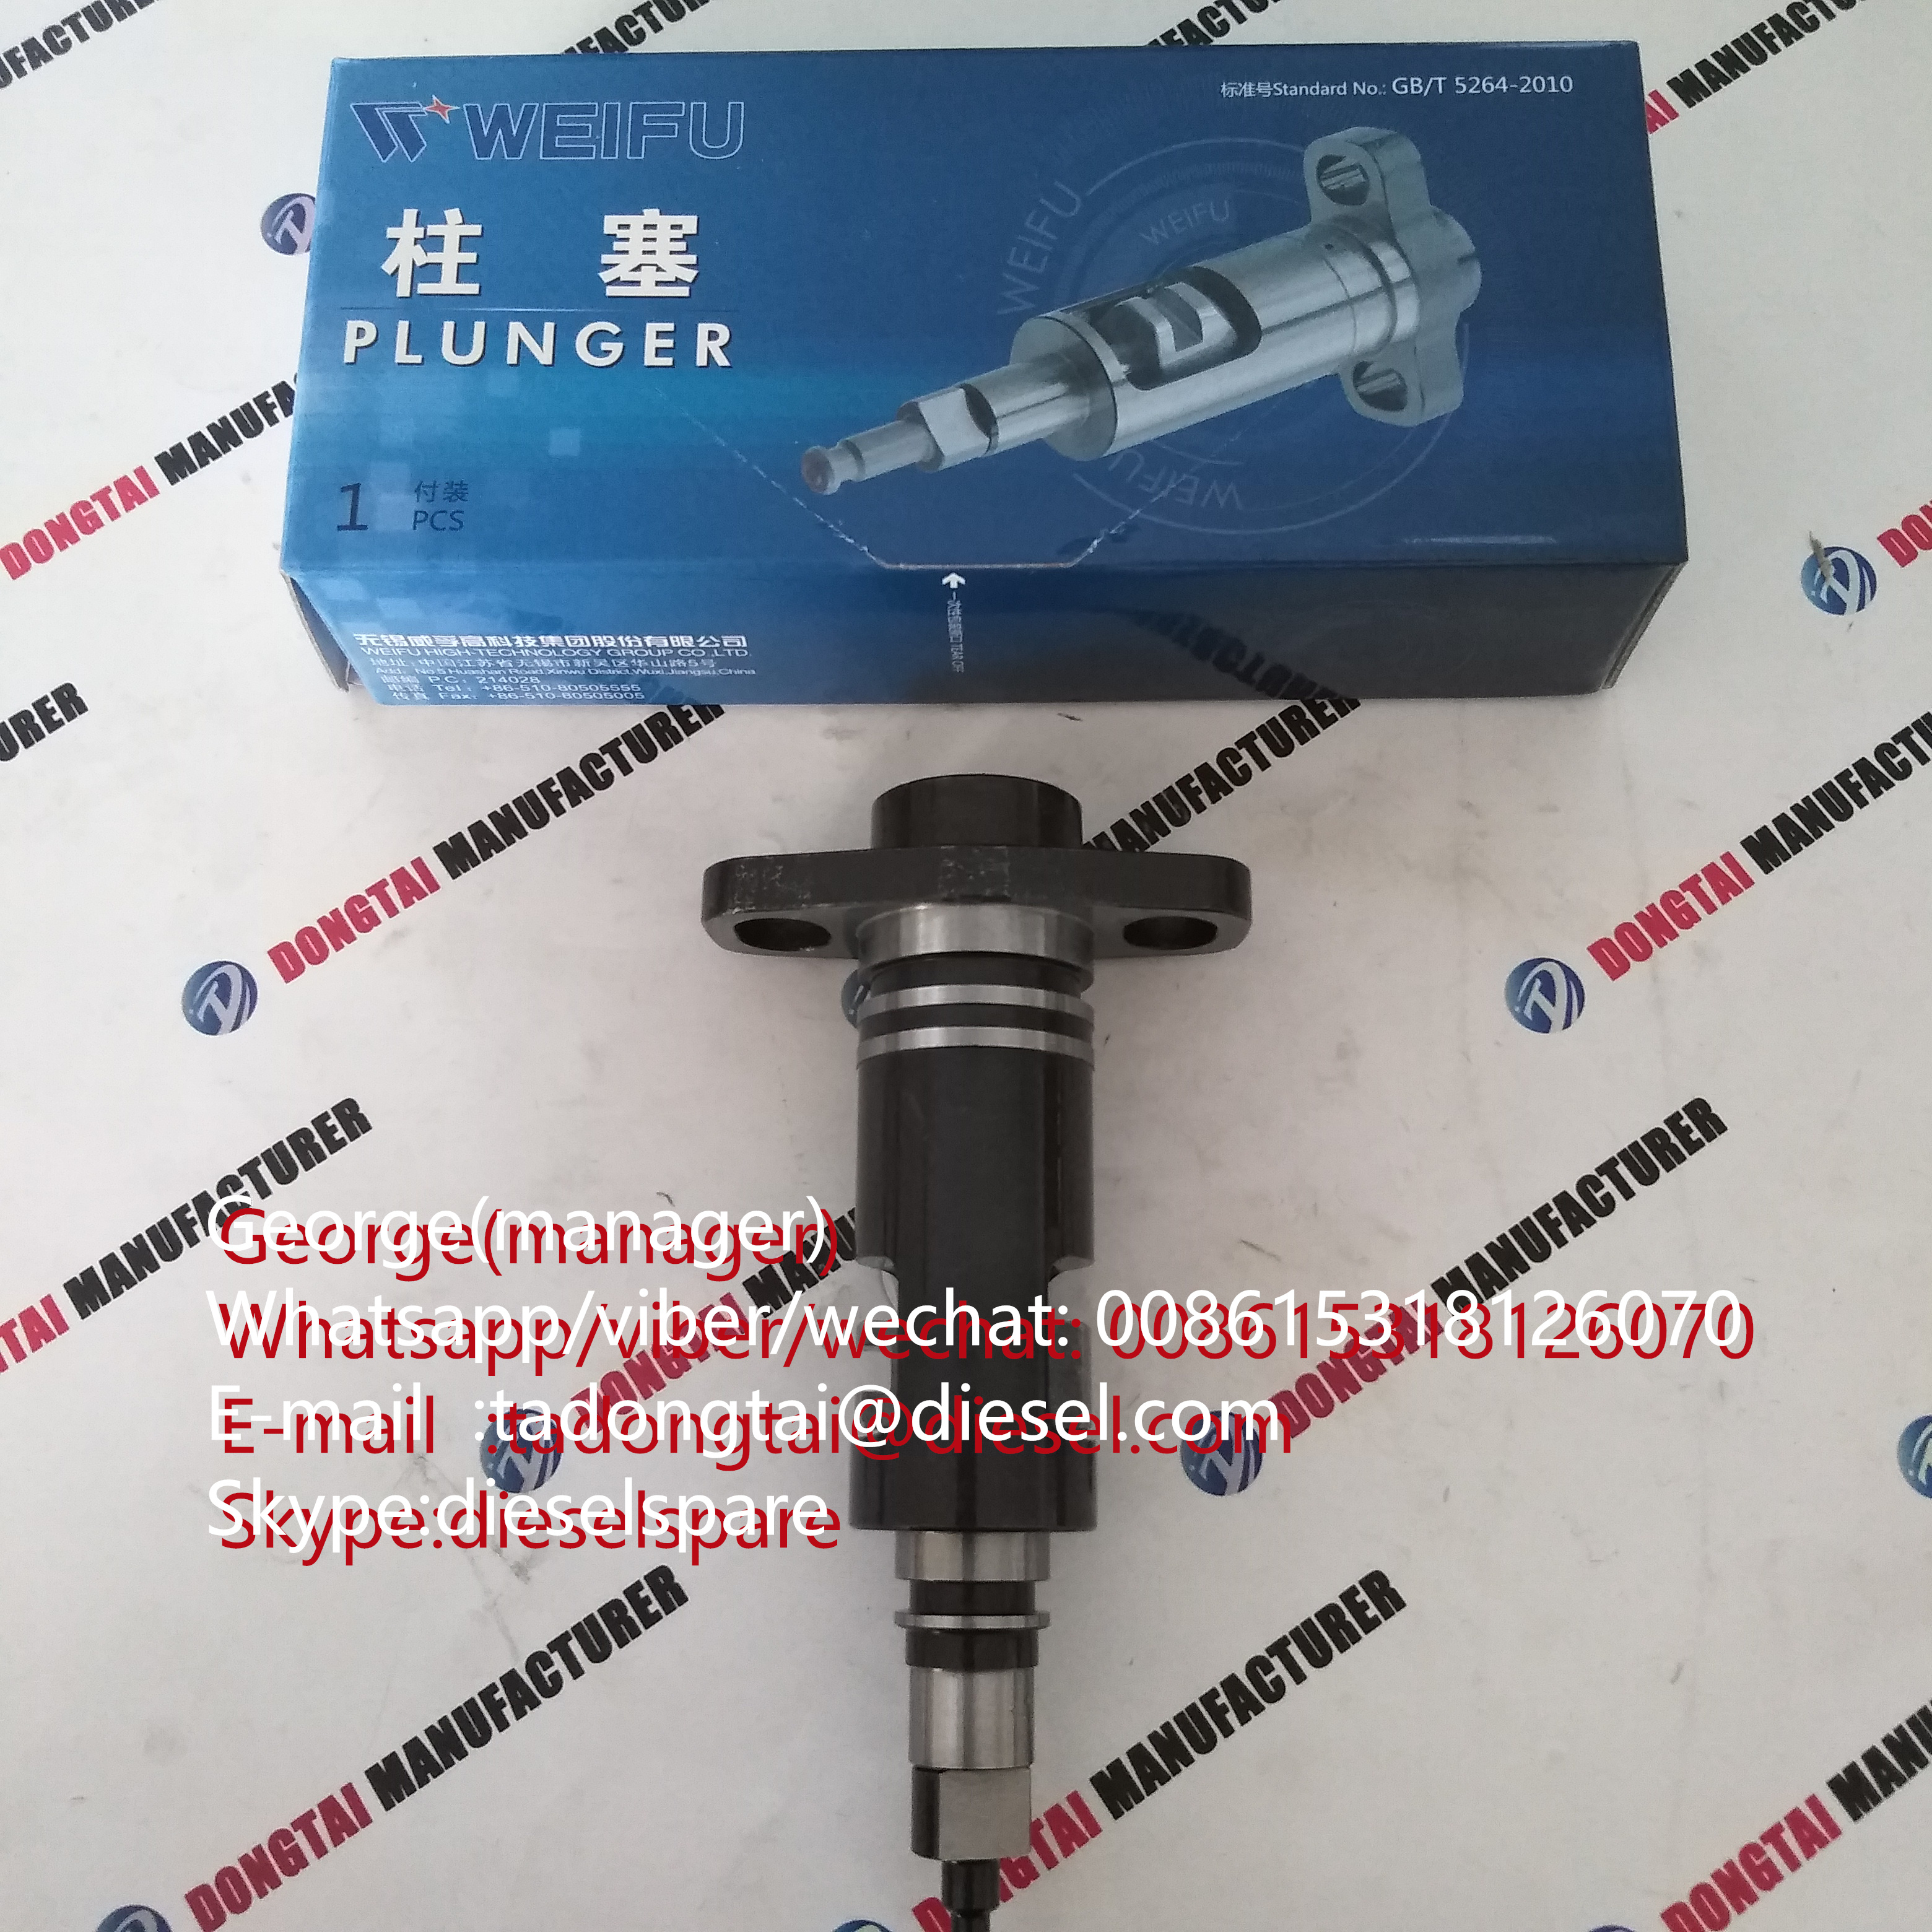 Massive Selection for Dongfeng Engine Parts Injector Nozzle - Diesel Fuel Plunger 140154-0320  9 443 615 736  141156-0820 141156-0821  9 413 612 992   M14   U4440   – Dongtai